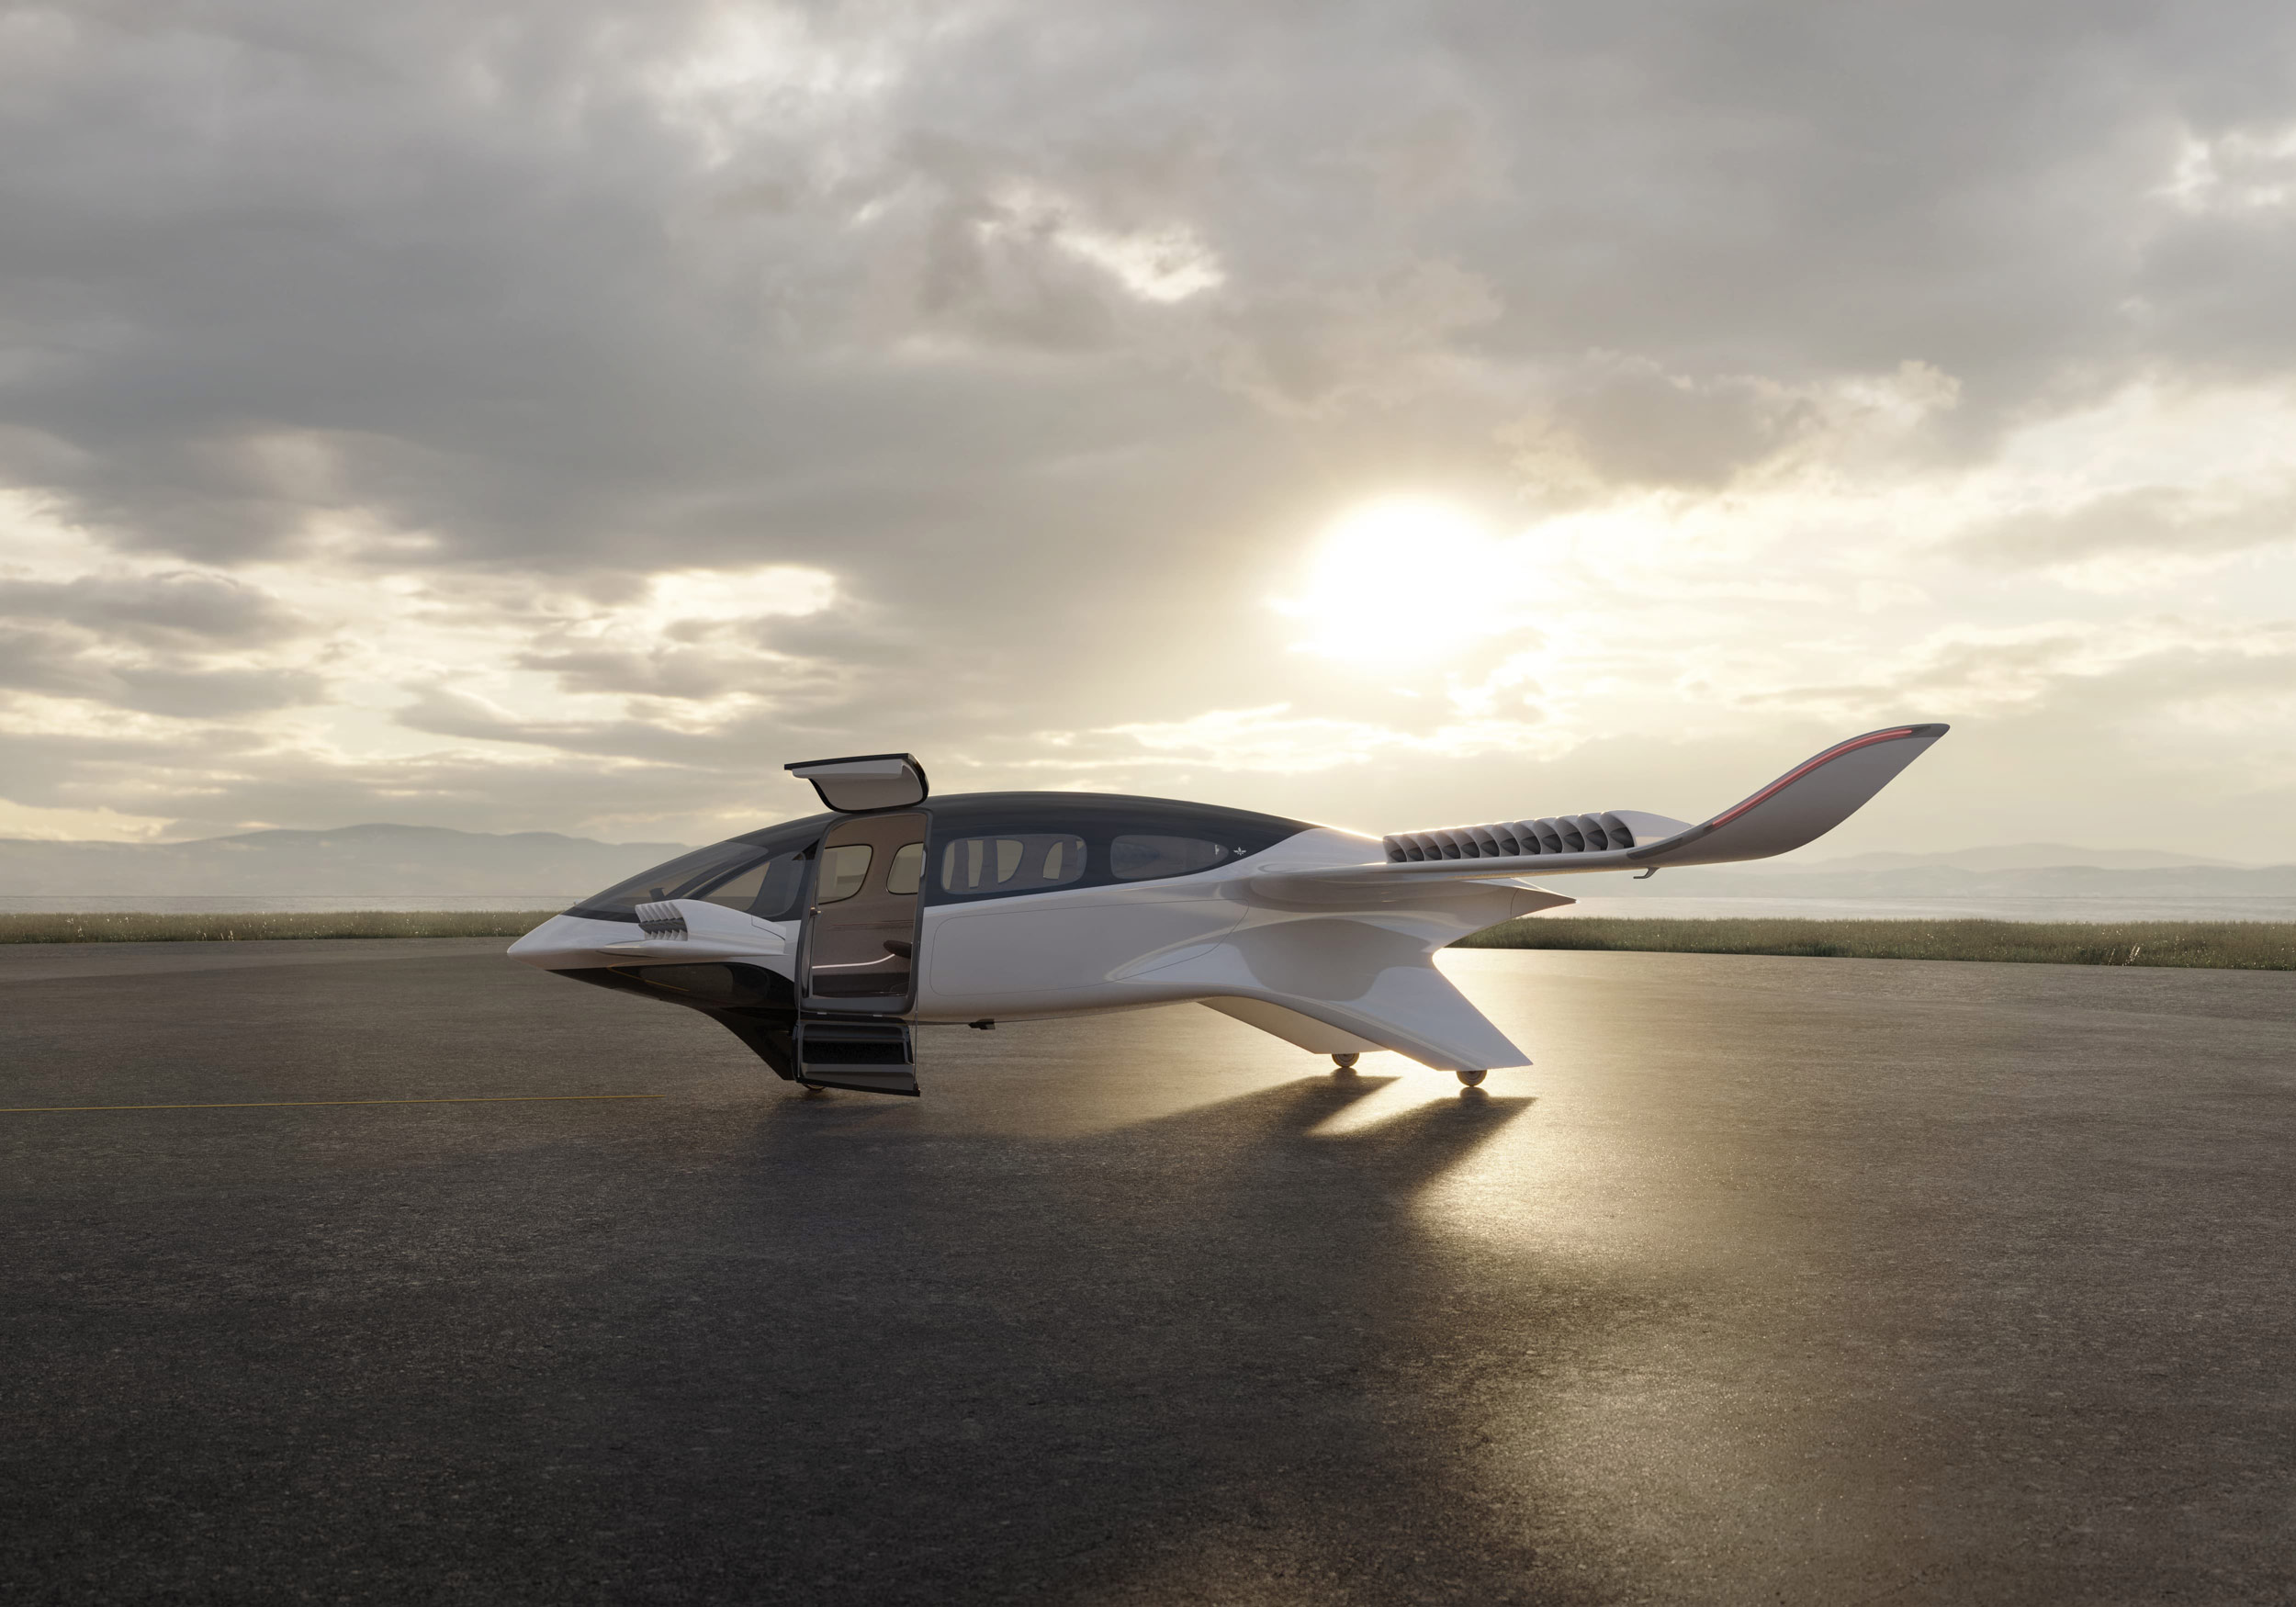 Lilium's aircraft differs from other eVTOL developments as it is powered by electric jet engines integrated into the wing flaps, rather than acting as an evolution of a helicopter